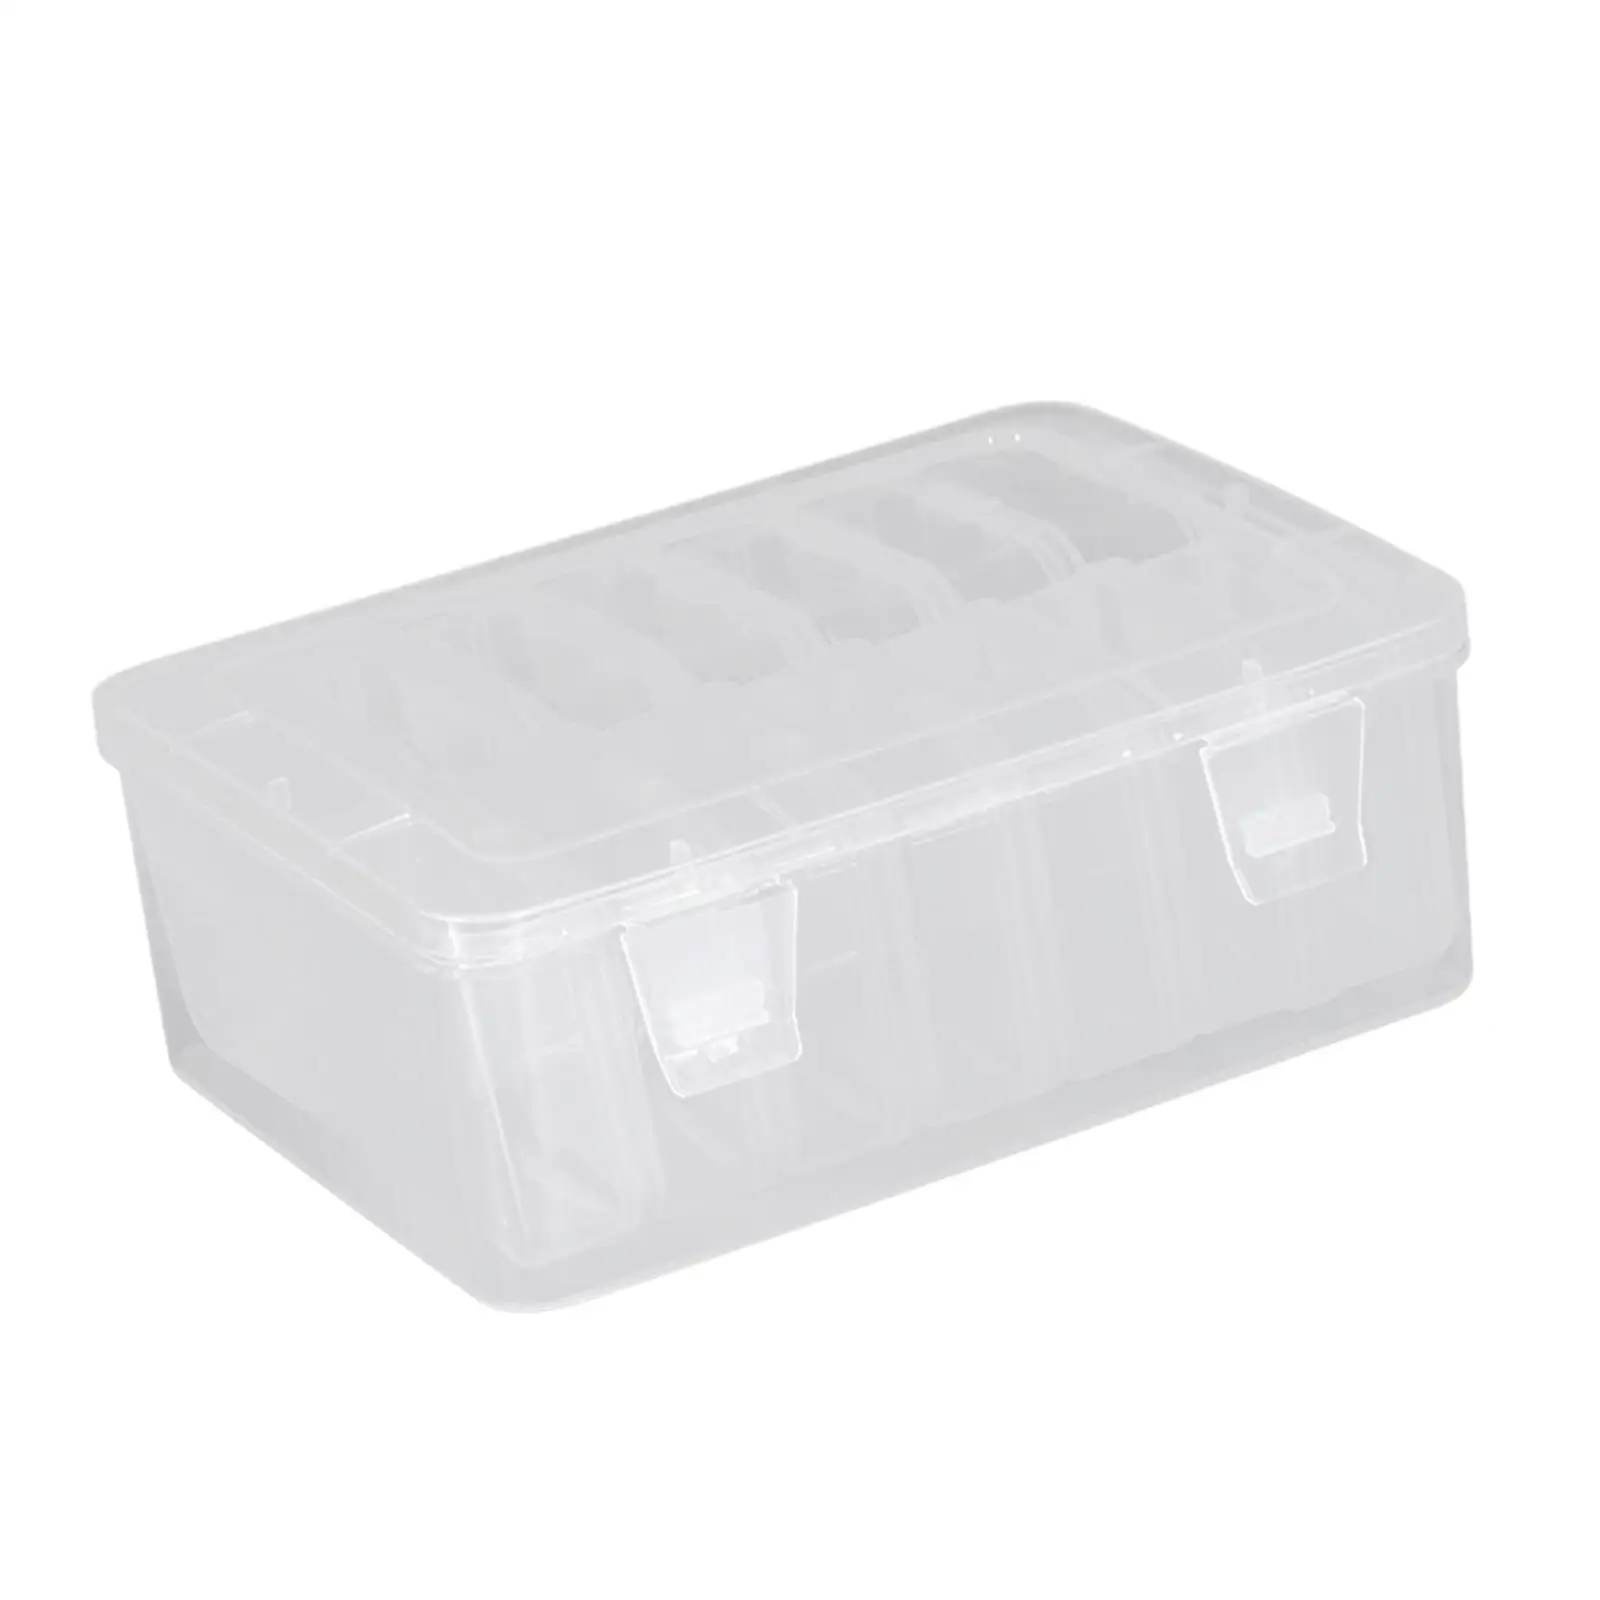 15 Pieces Rectangle Bead Organizers Box with Hinged Lid Small Clear Bead Storage Containers Boxes for Earrings Craft Supplies